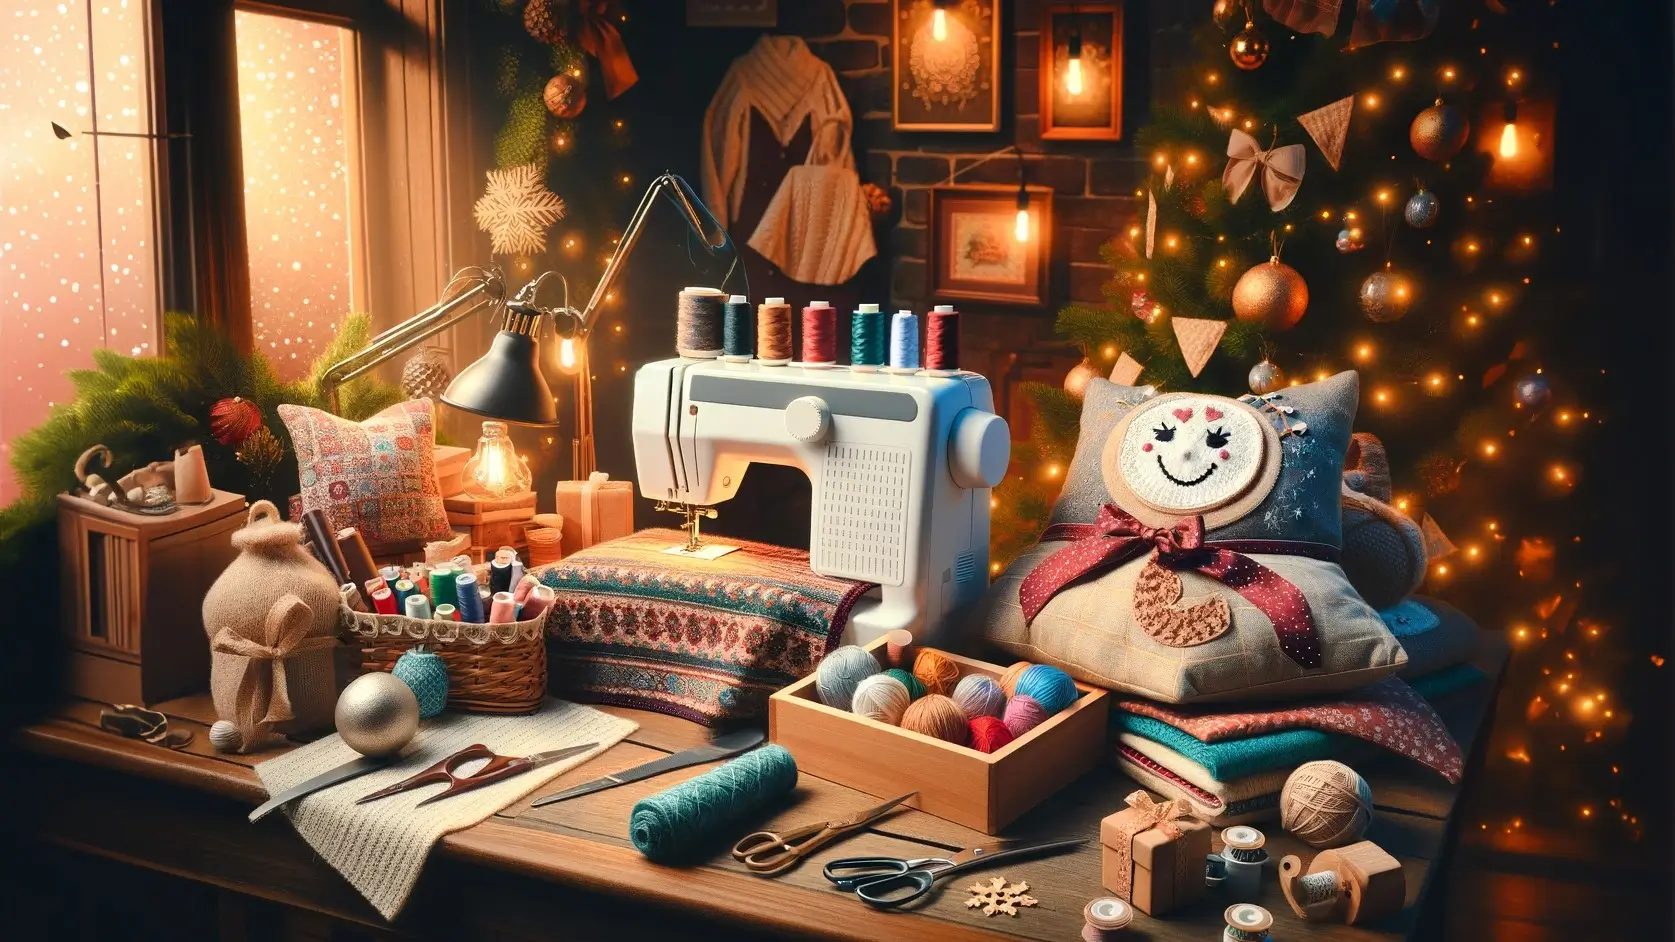 10 sewing gift ideas for Christmas